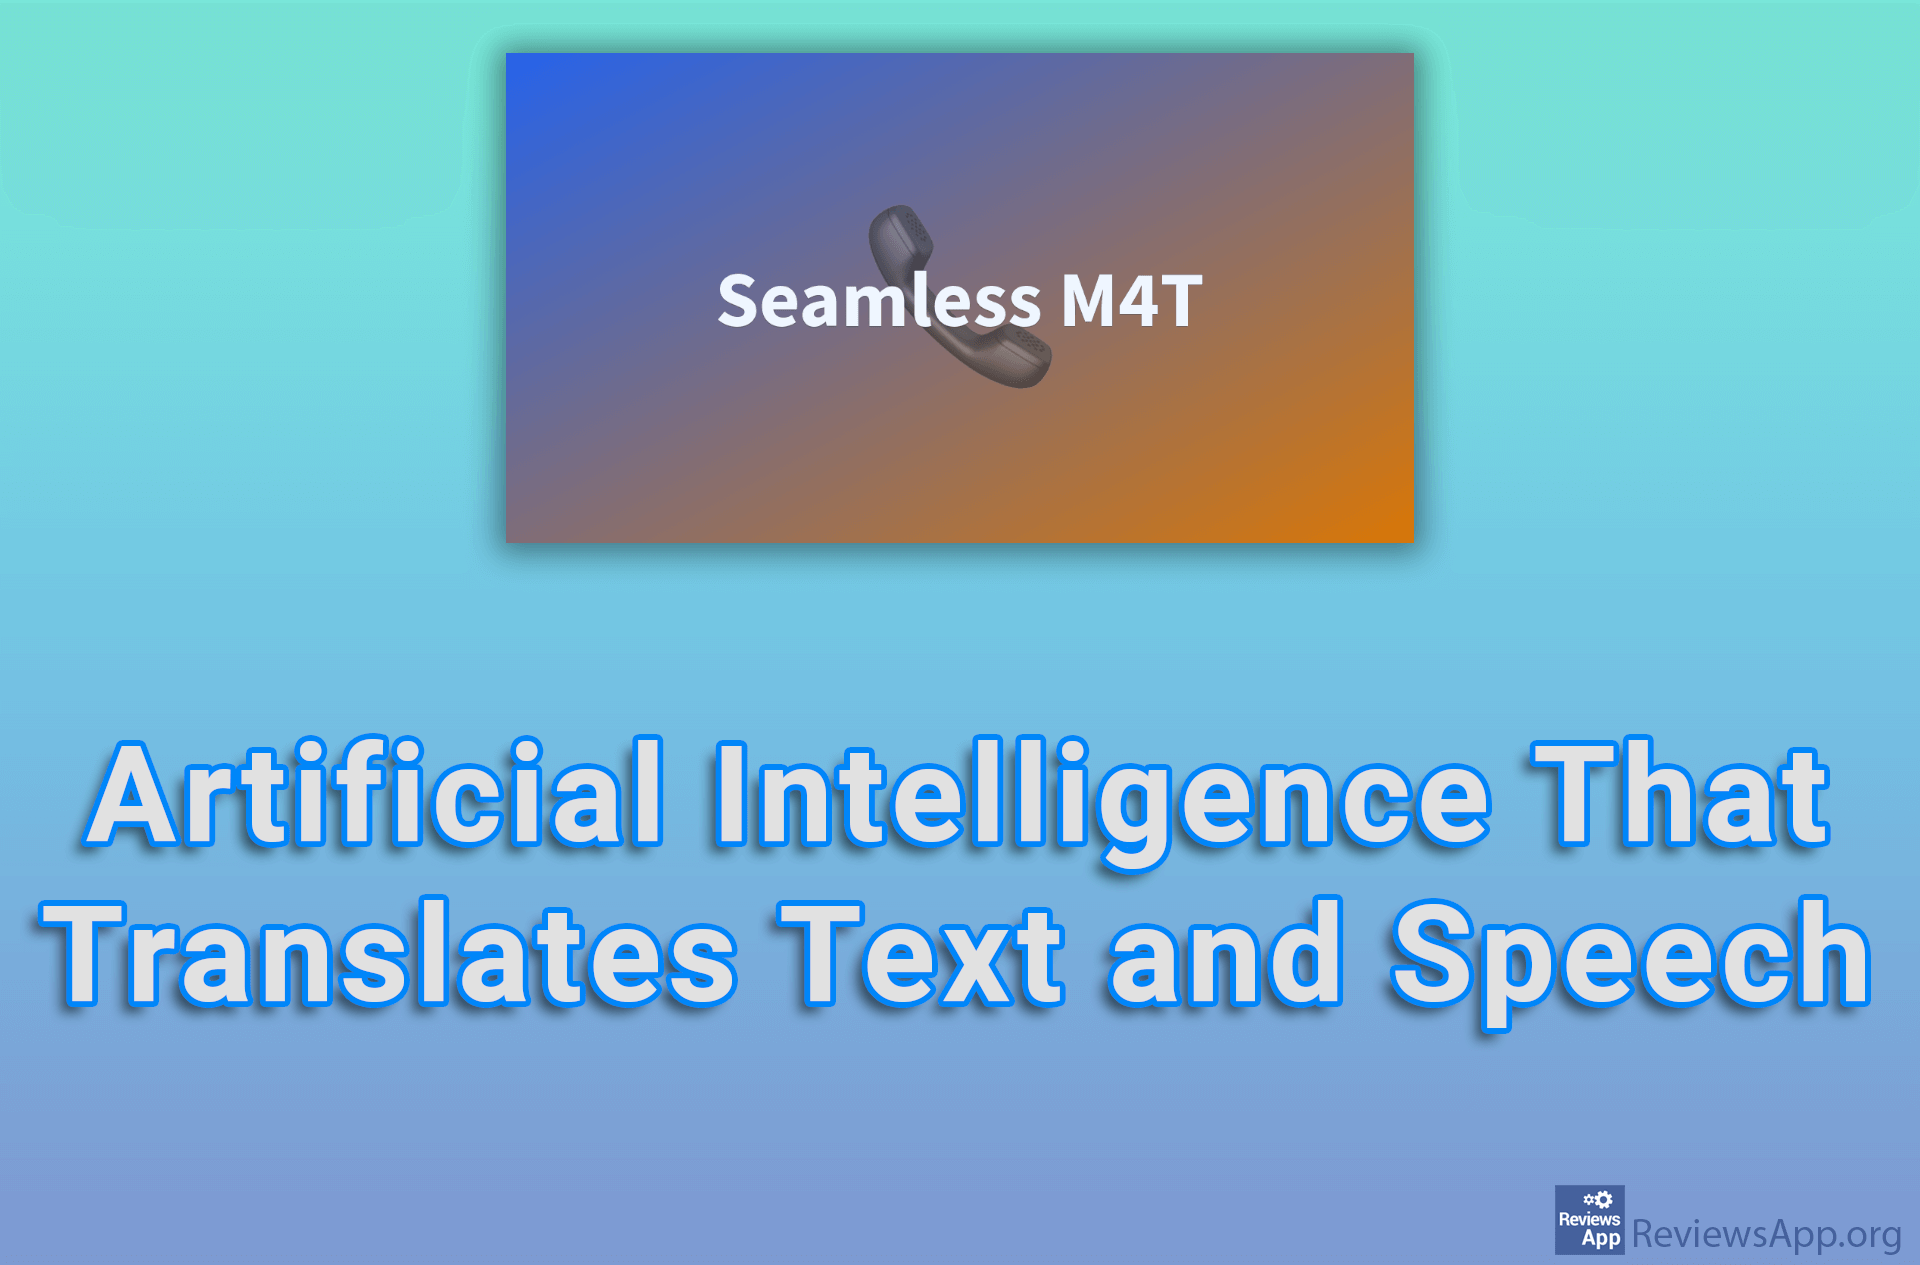 Seamless M4T – Artificial Intelligence That Translates Text and Speech